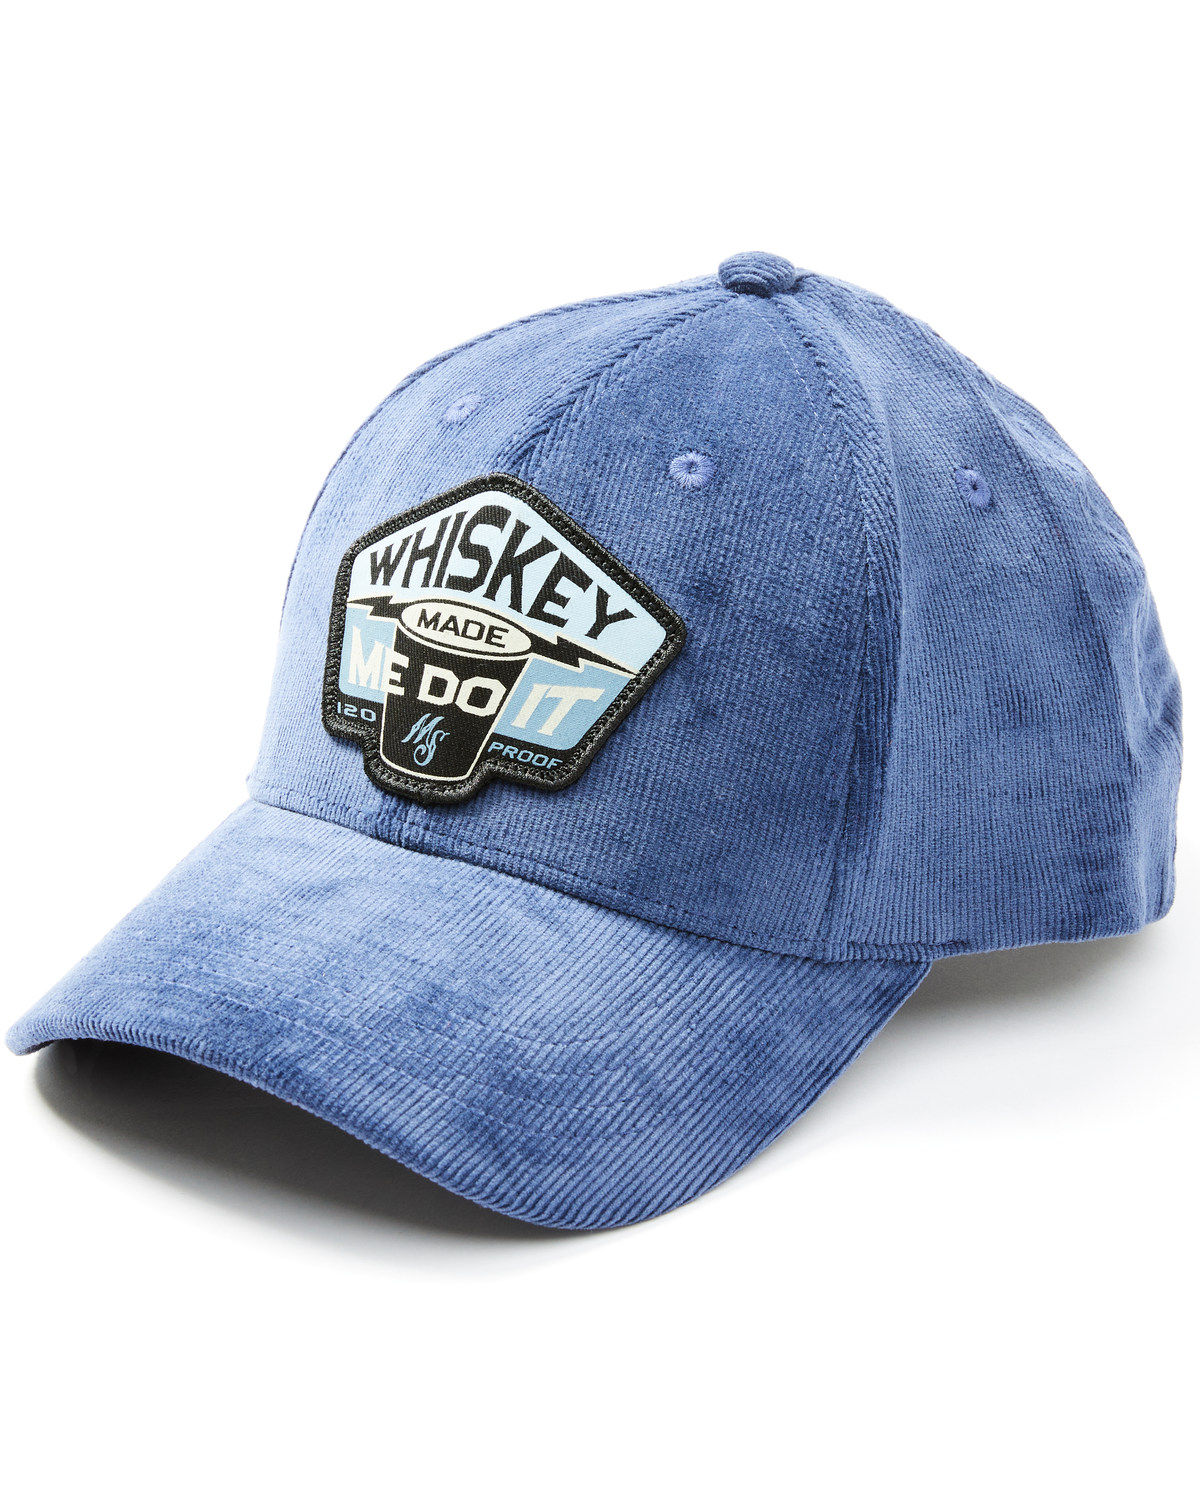 Moonshine Spirit Men's Cord Whiskey Made Me Do It Patch Solid-Back Ball Cap